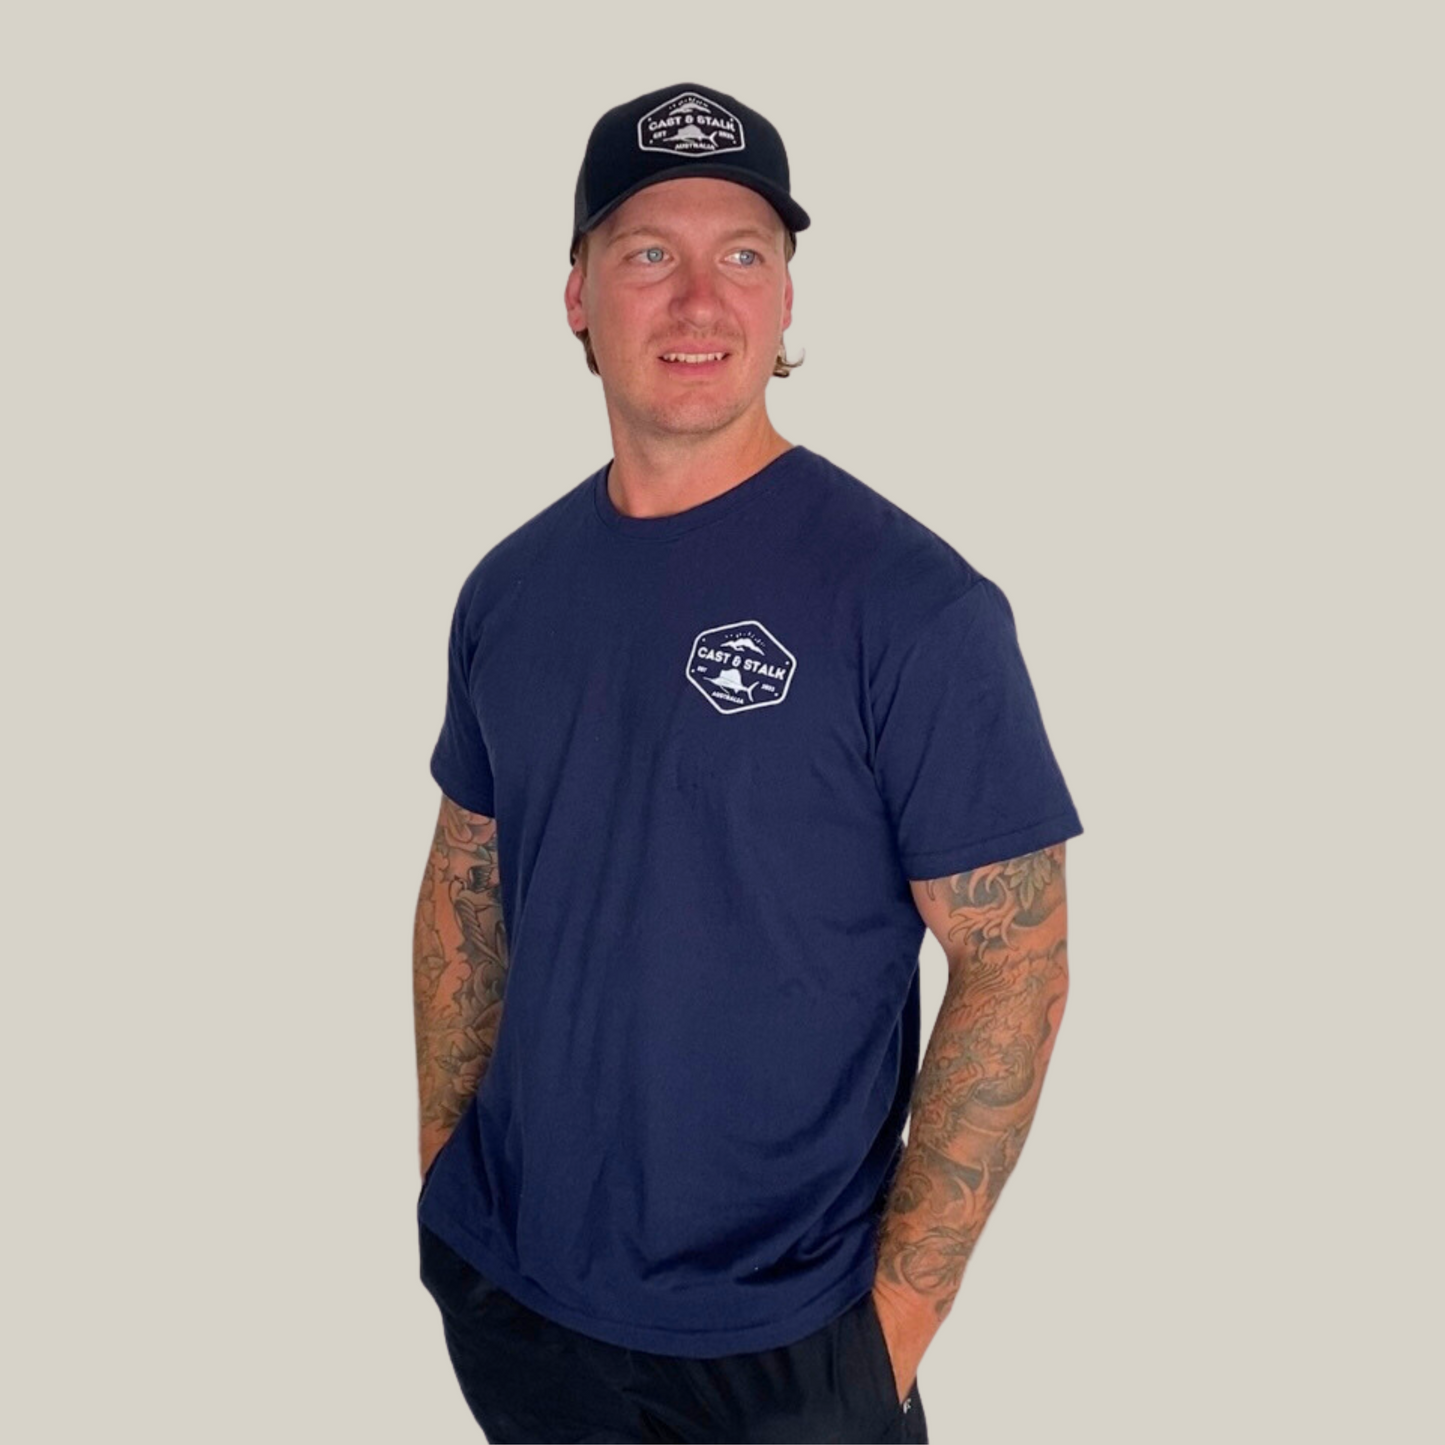 Cast and stalk t-shirt navy blue